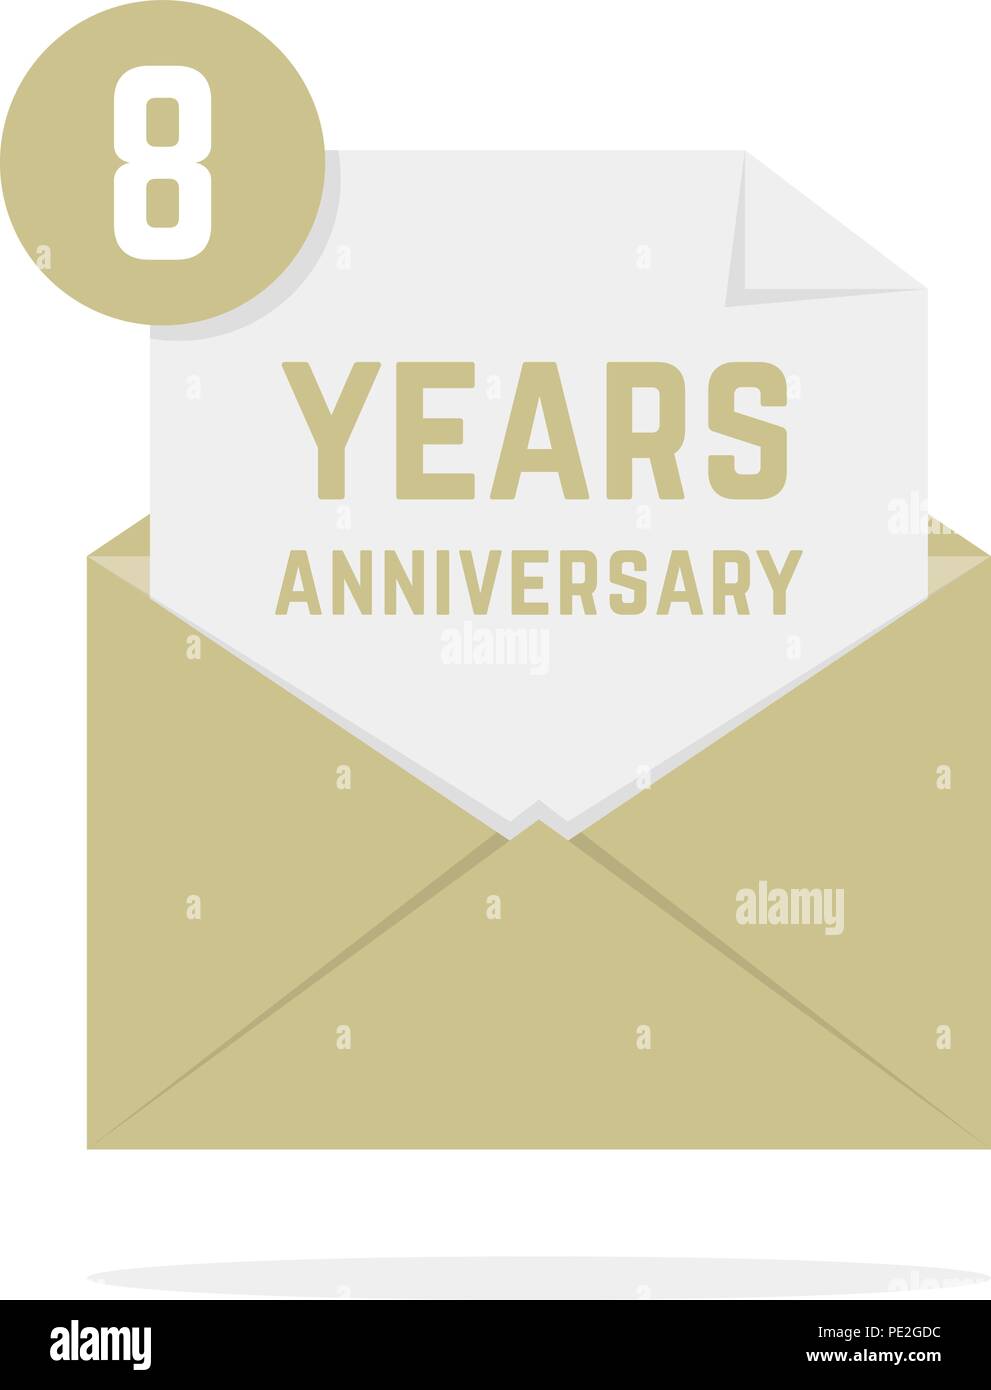 8 years anniversary icon missive in letter Stock Vector